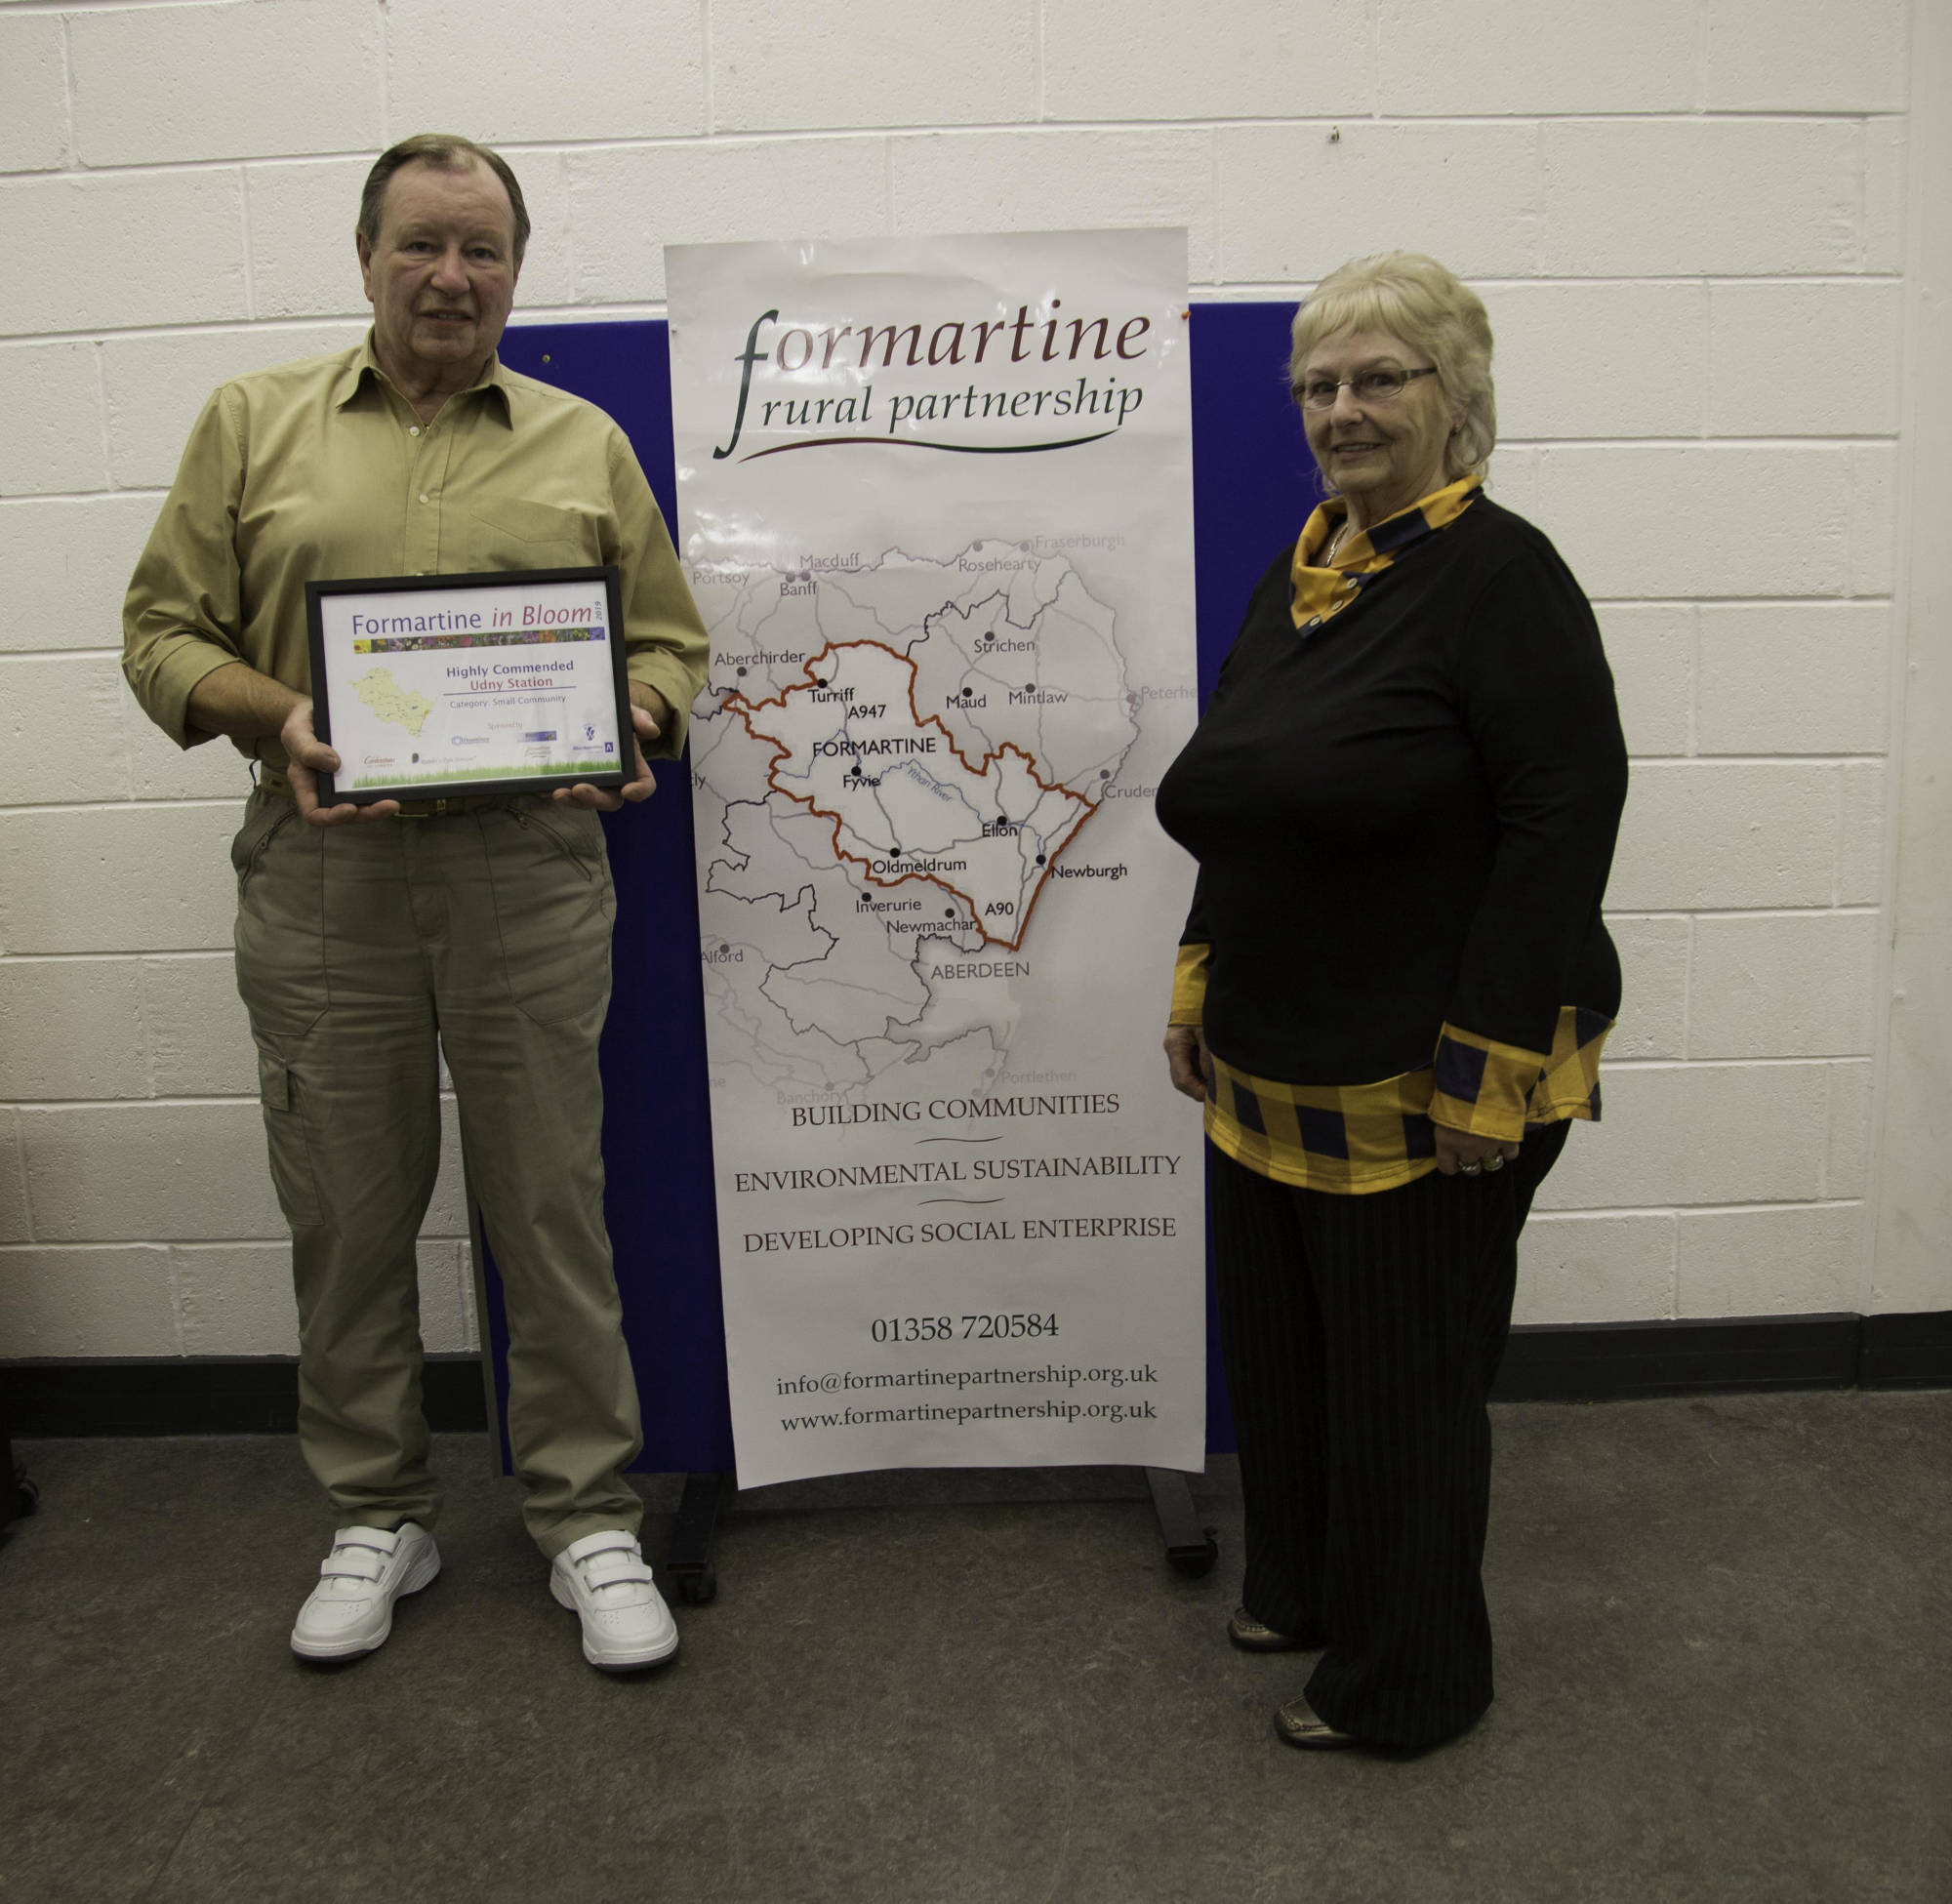 Small community highly commended - Udny Station